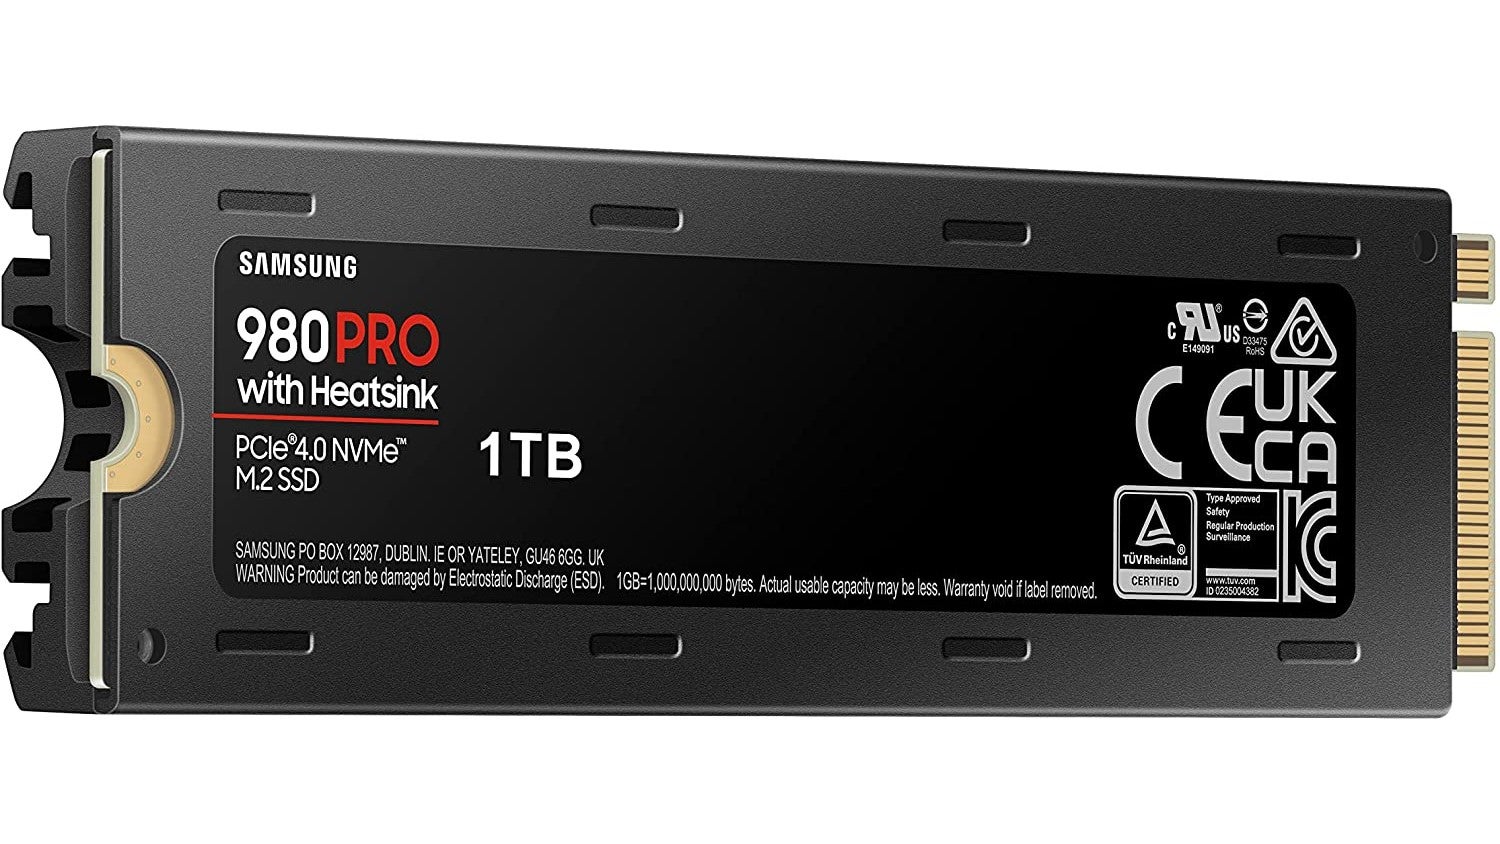 Image for Get a 1TB Samsung 980 Pro PCIe 4.0 SSD for £120, £50 cheaper than it was last month